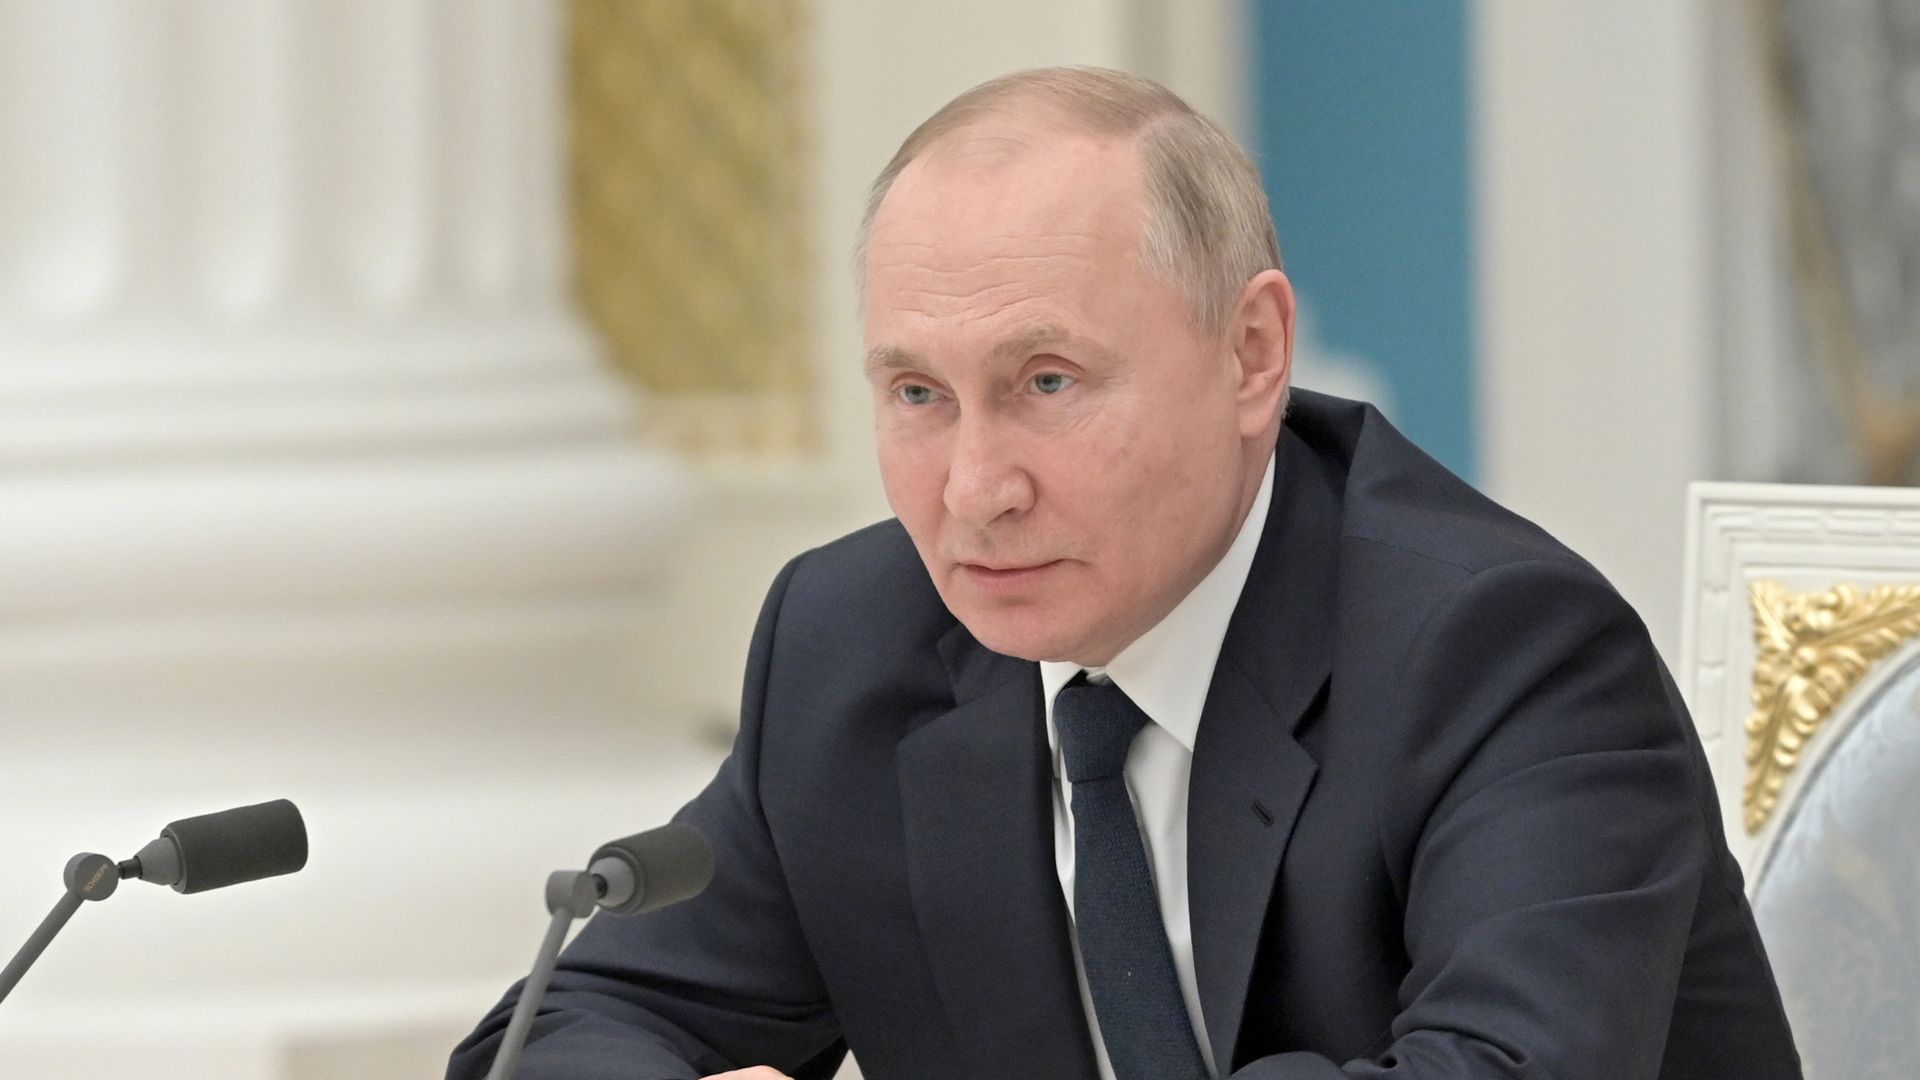 Photo of Vladimir Putin sitting with his hands folded in front of him as he leans forward toward a mic